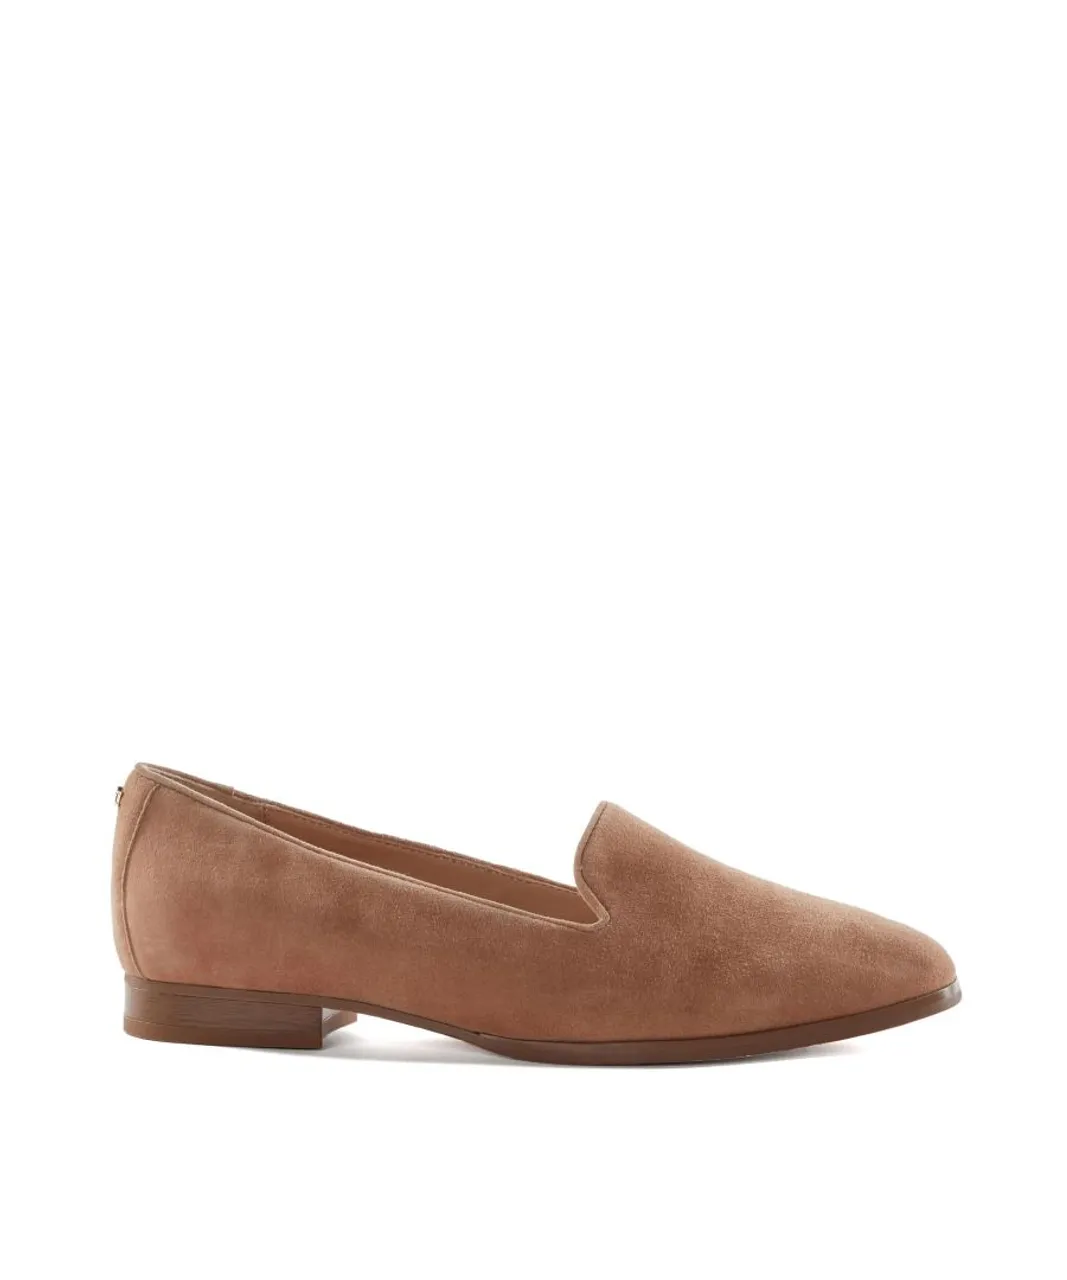 Dune London Womens Ladies Glassi - - Slipper Loafer - Camel Leather (archived)